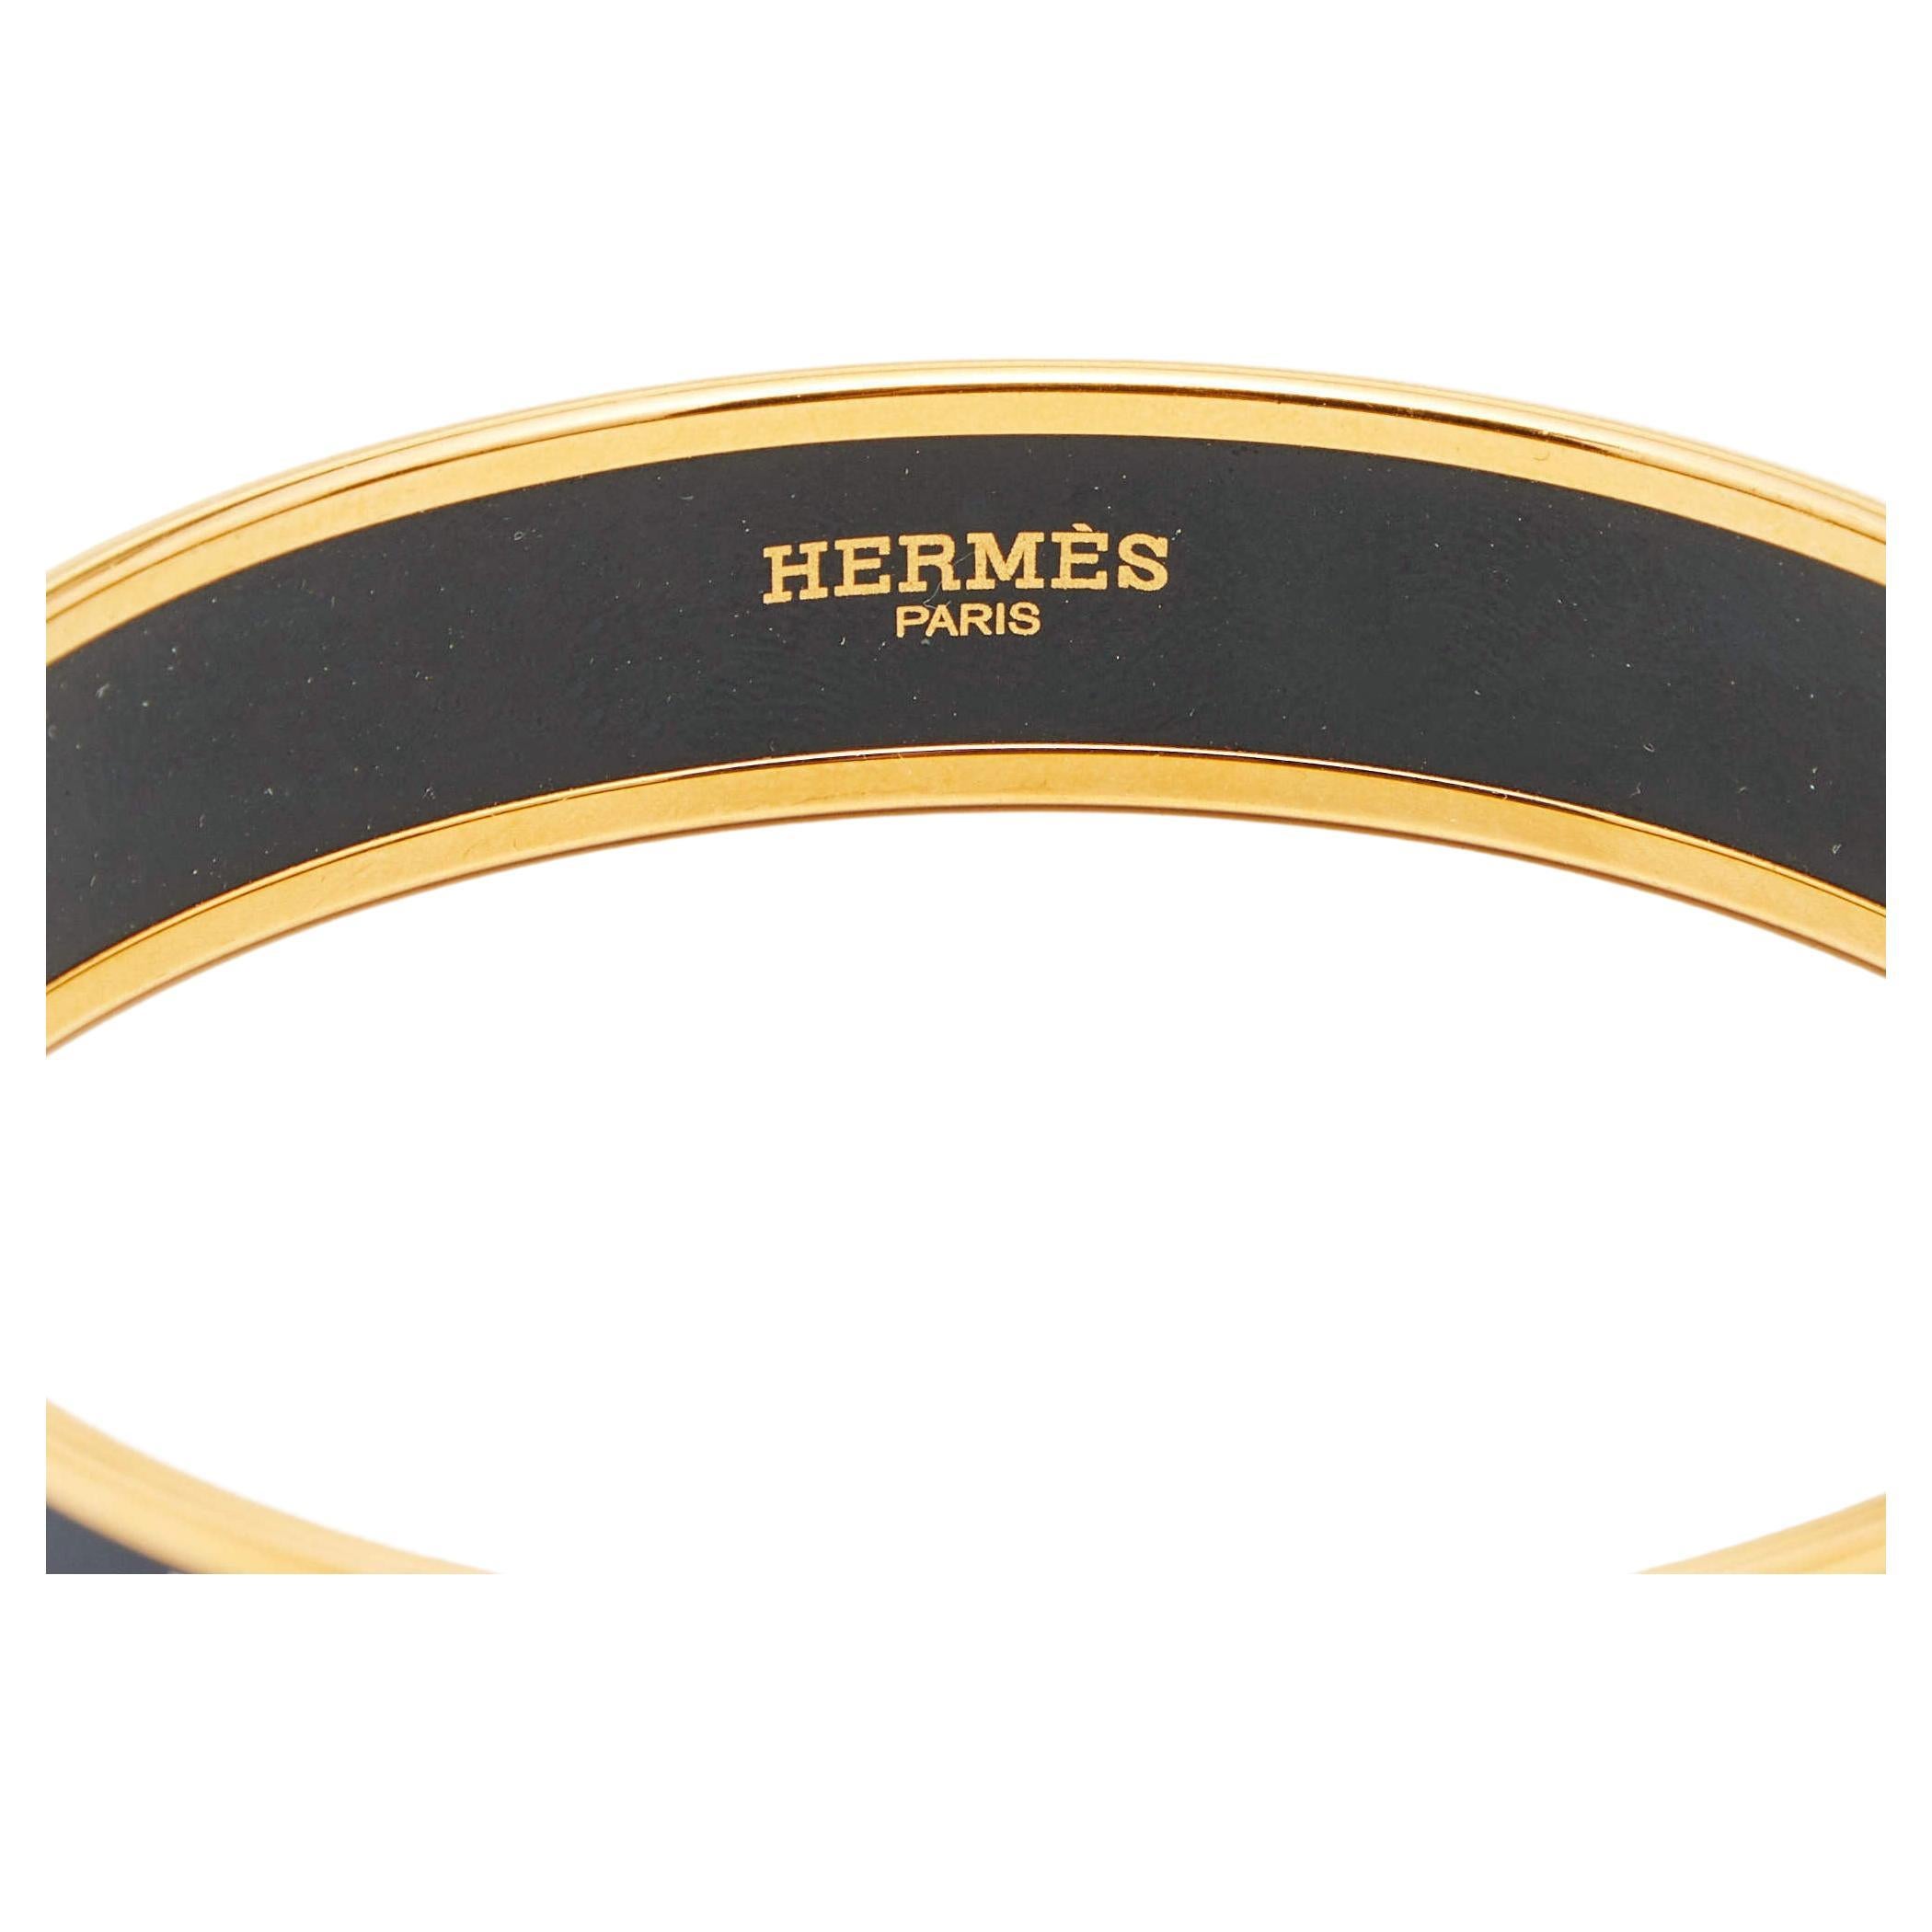 Exuding glamour and classic style, this stunning bangle bracelet from the House of Hermes is something you'll love having around your wrist. It is a gold-plated metal creation that is enhanced with black enamel. Featuring iconic brand details, this